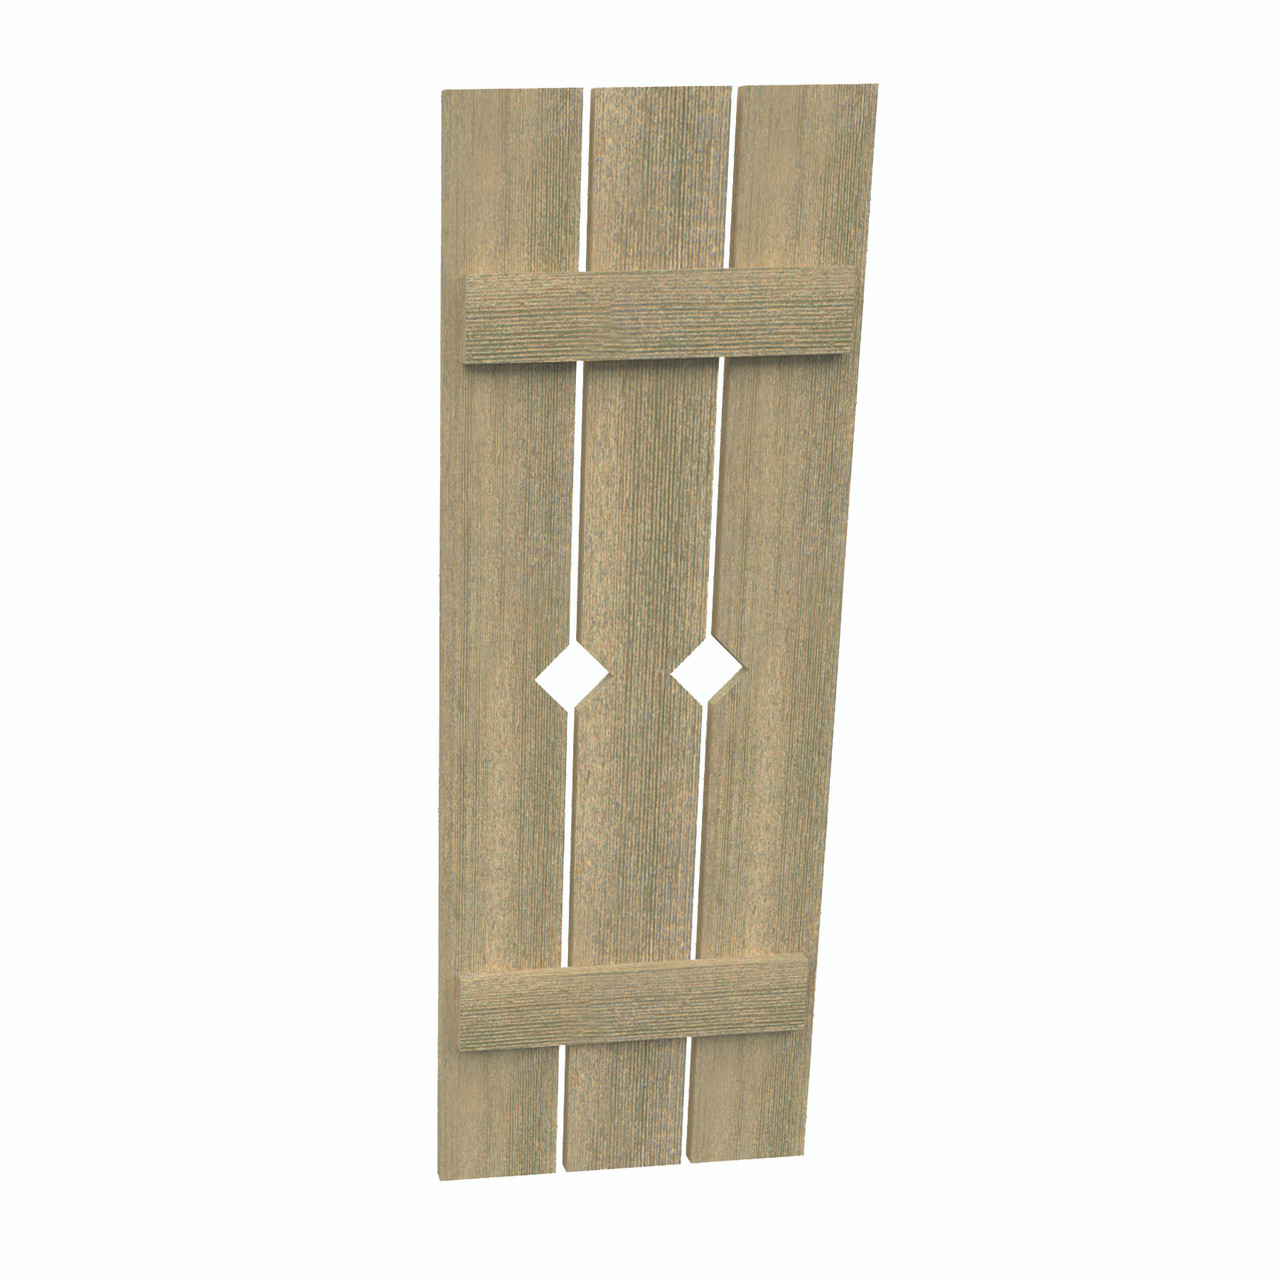 18 inch by 72 inch Plank Shutter with 3-Plank, Diamond